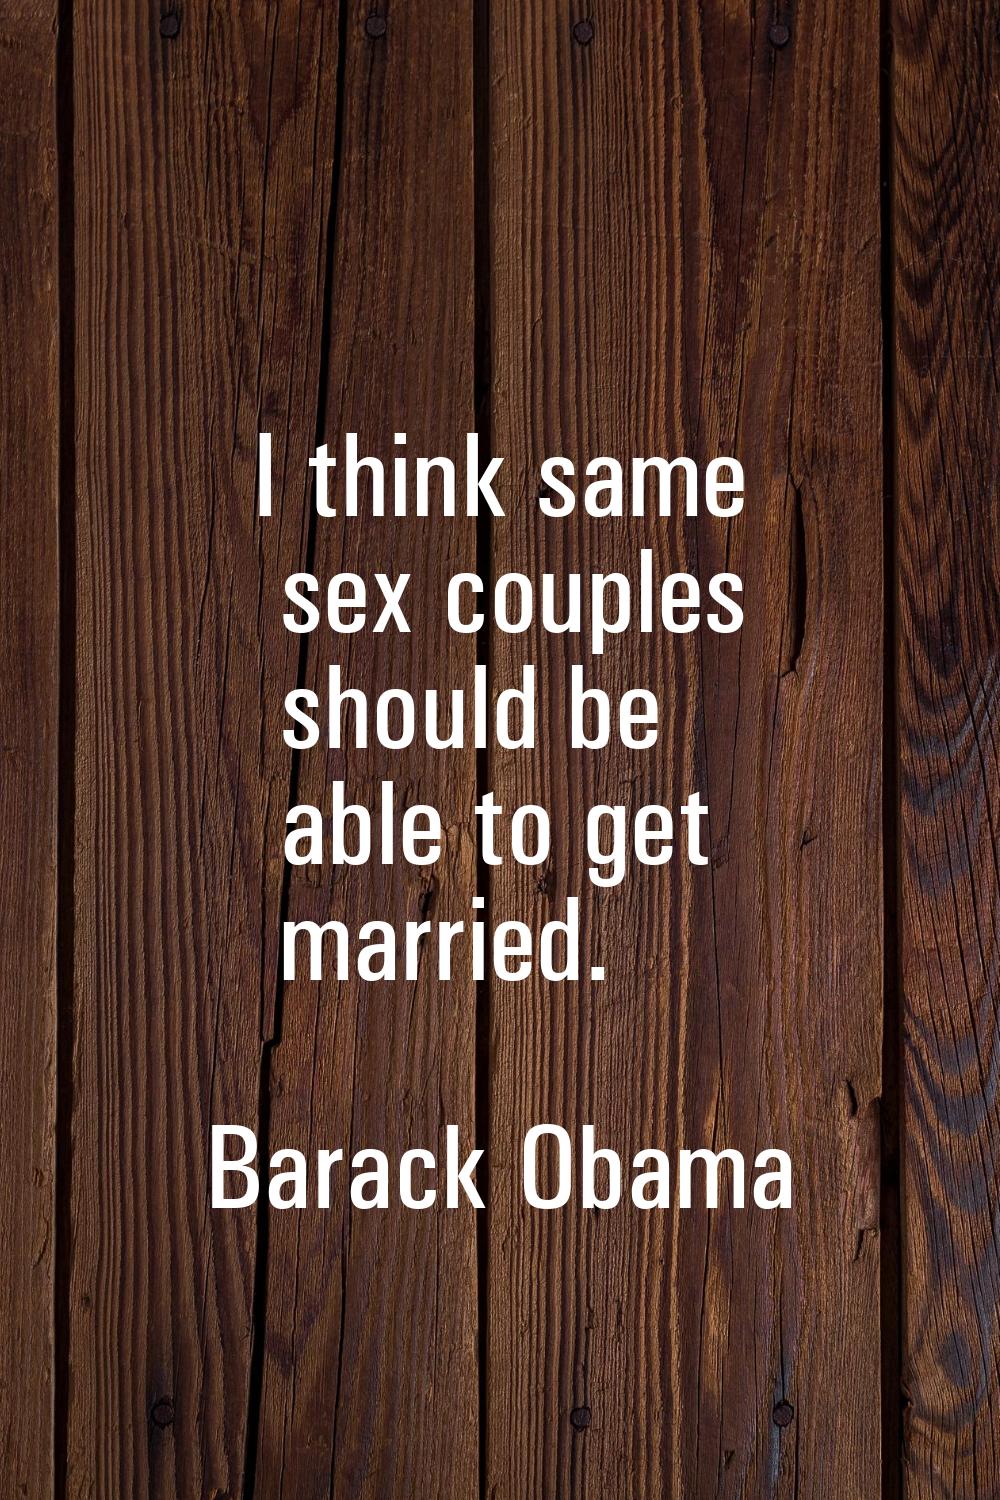 I think same sex couples should be able to get married.